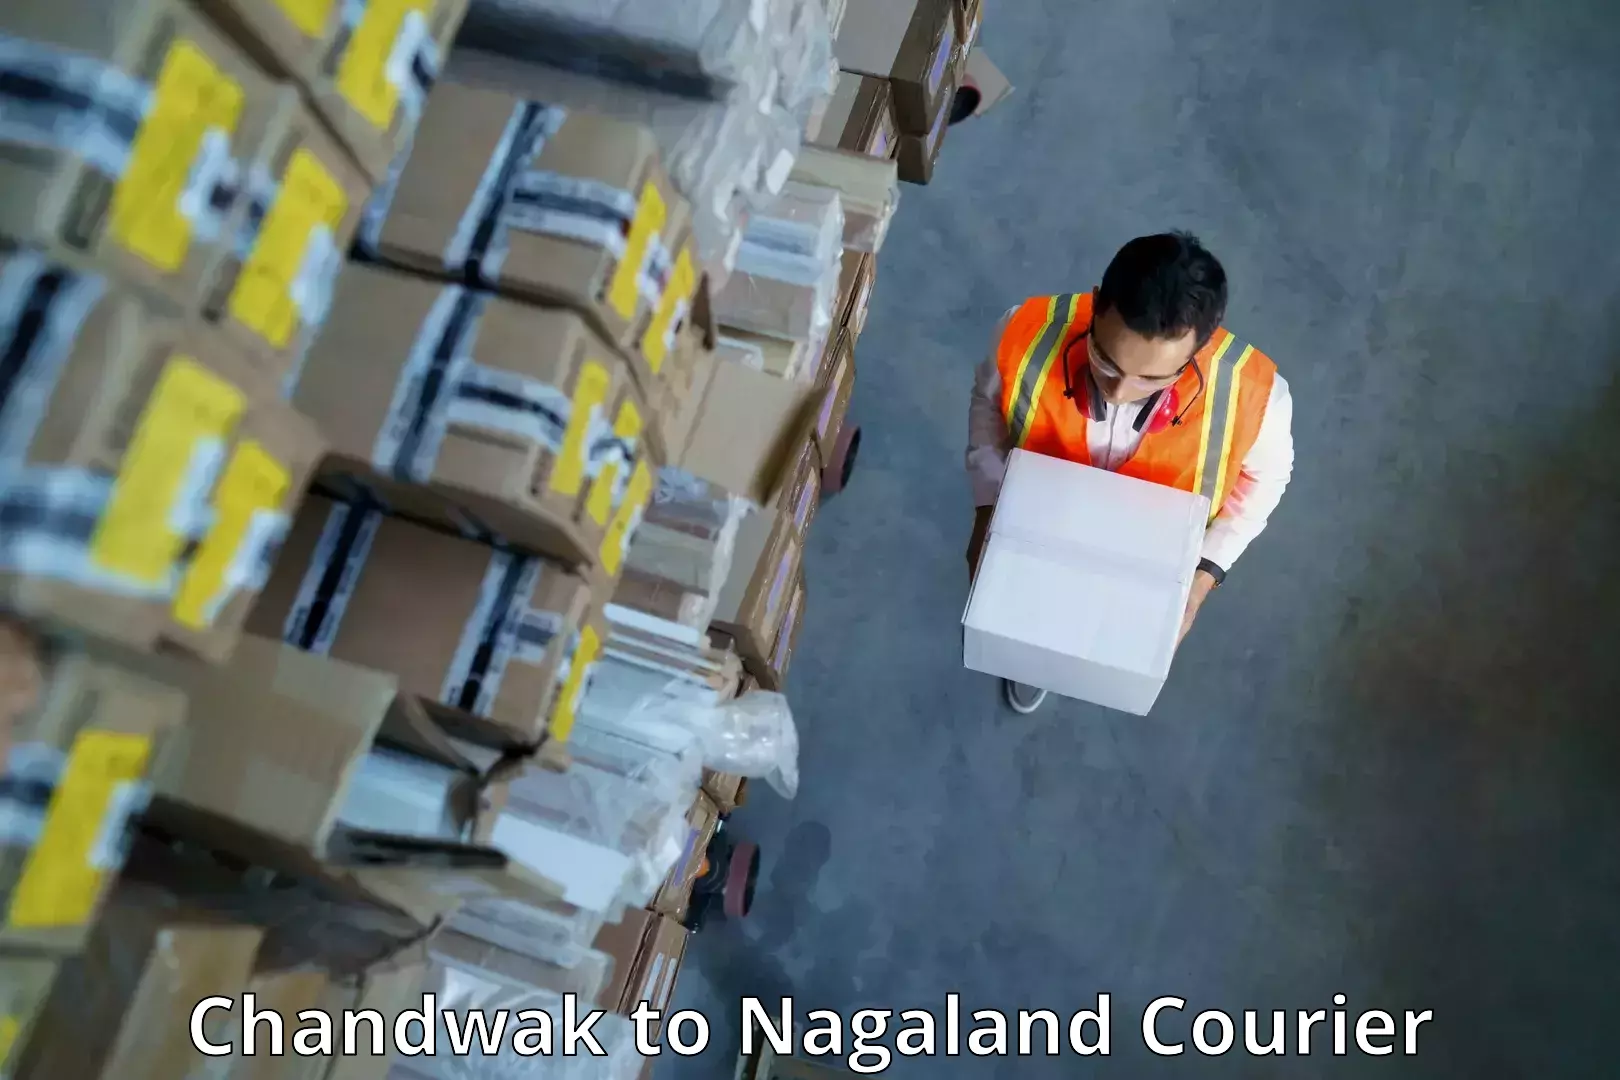 Speedy delivery service Chandwak to NIT Nagaland